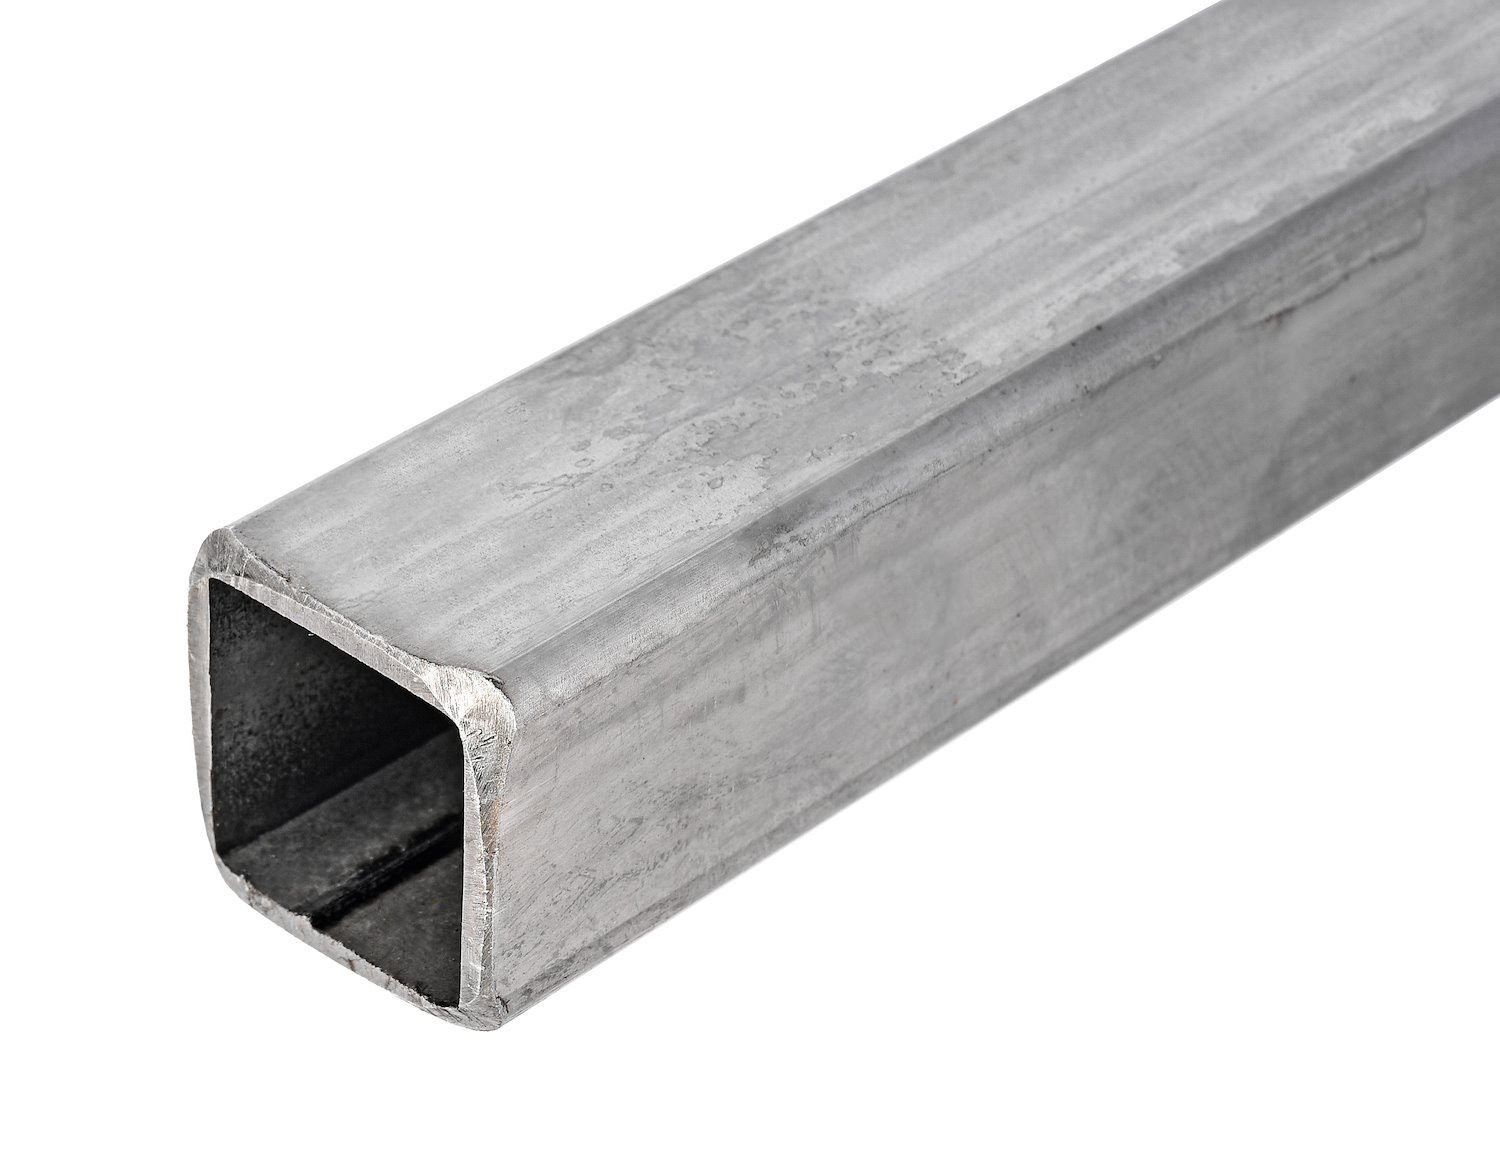 Mild Steel Tubing [Square, 1 in. Width x 0.083 in. Thickness x 8 ft. Length]